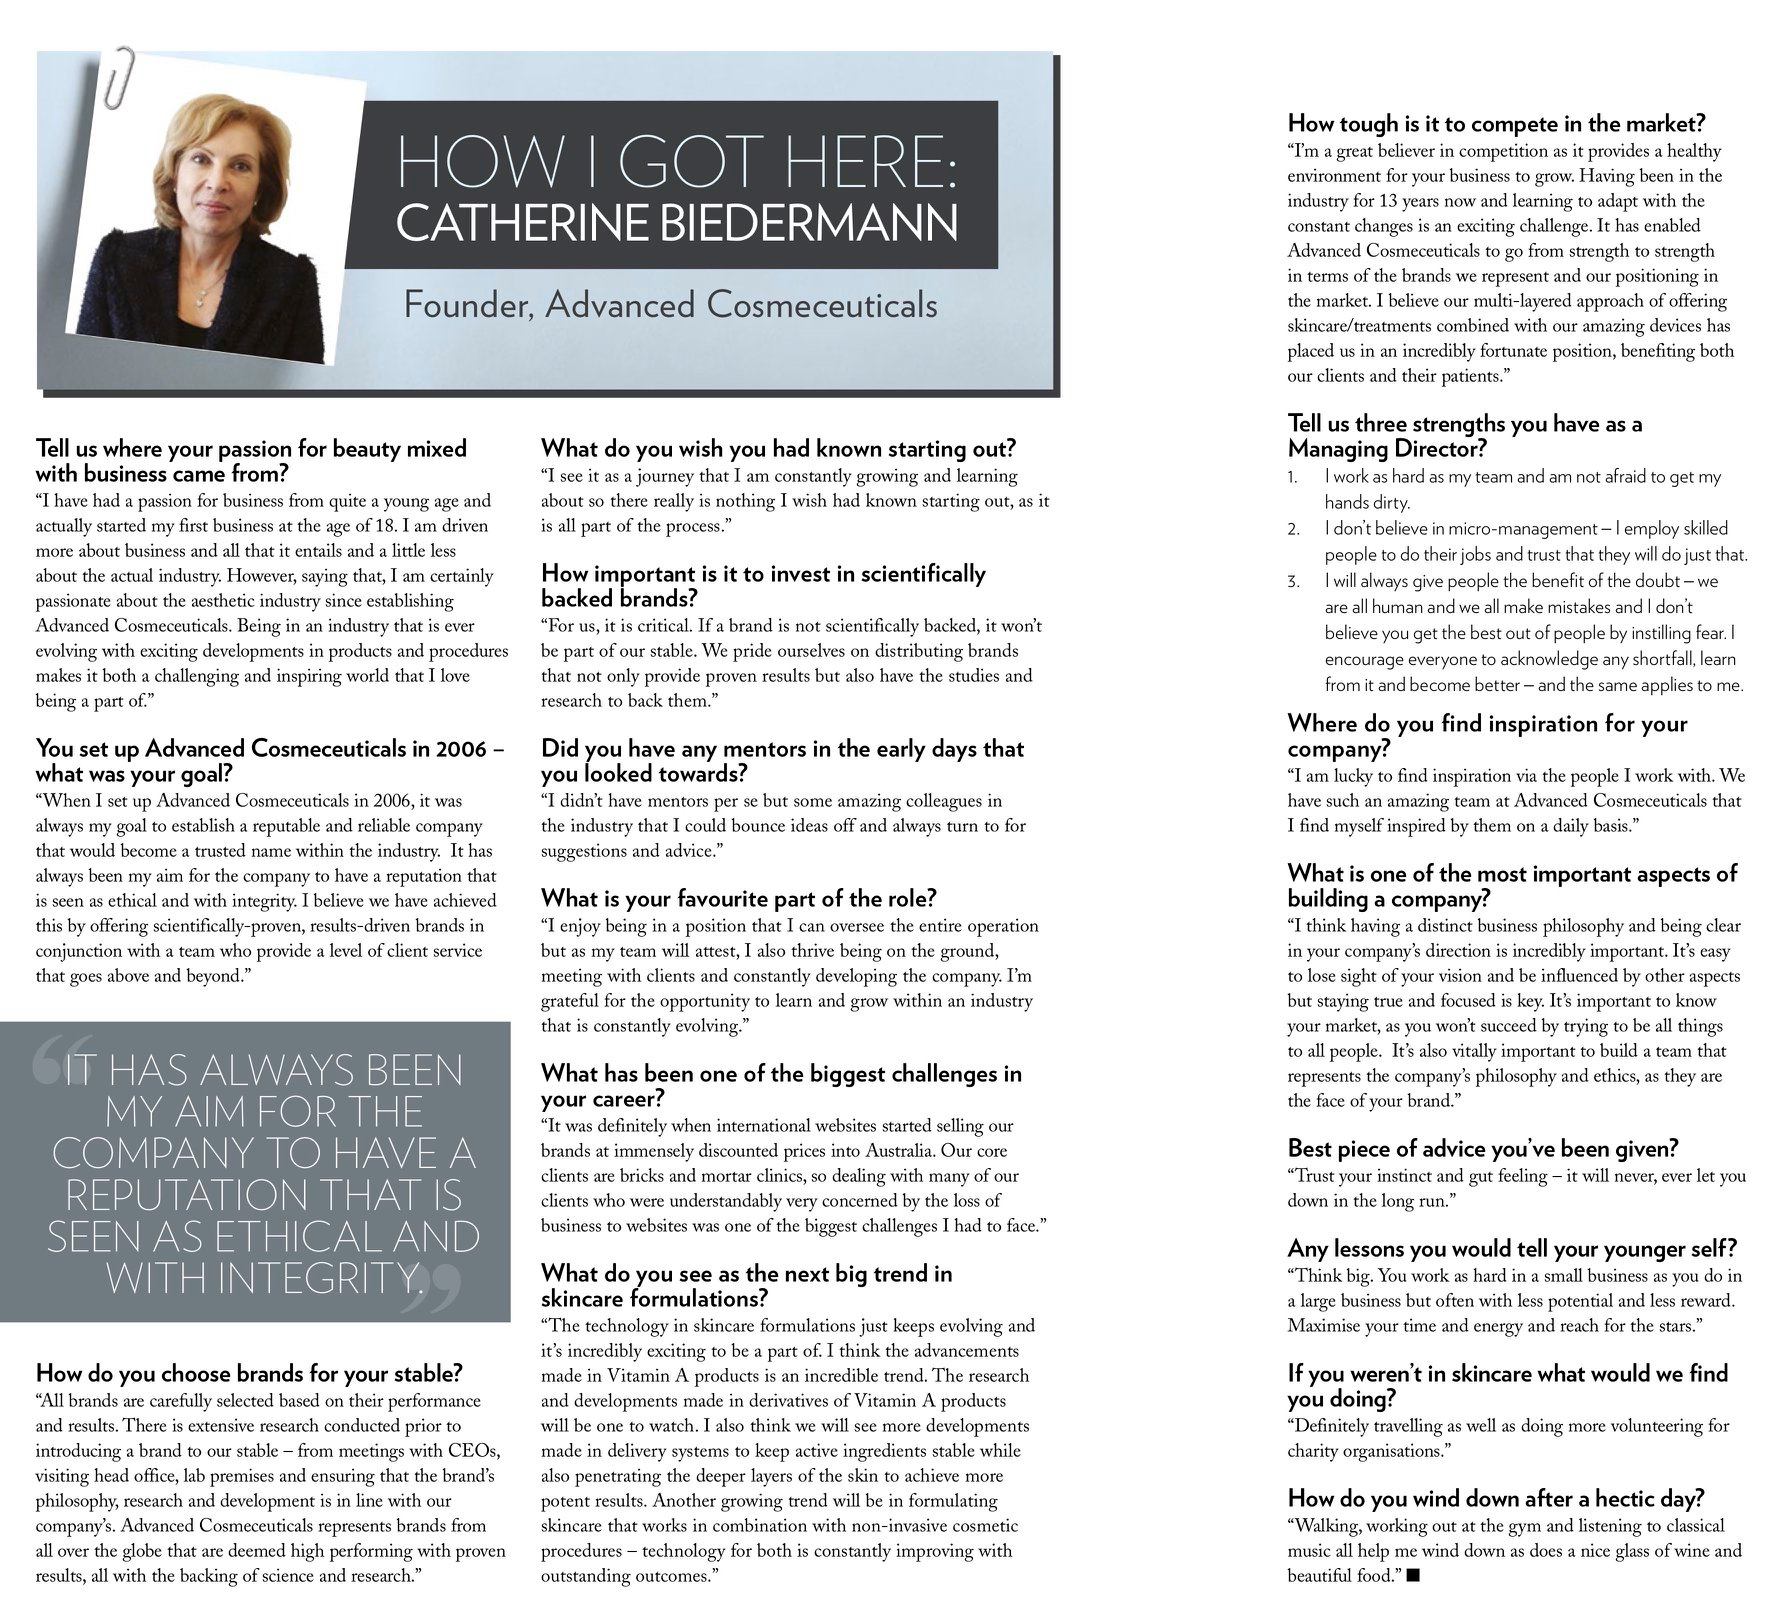 Professional Beauty Magazine's interview with our Managing Director, Catherine...